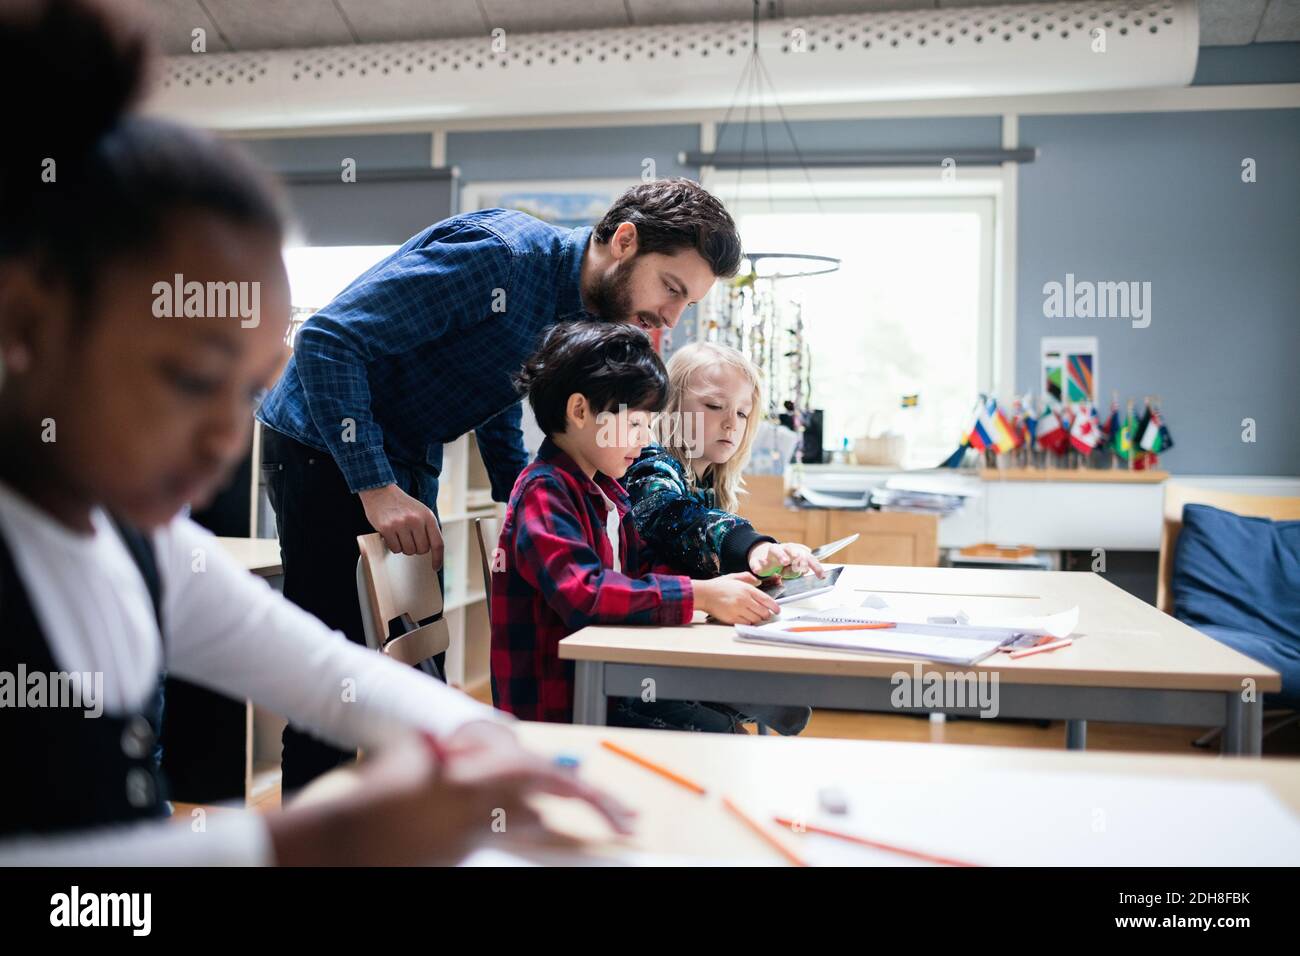 Teacher looking at boy and girl using digital tablet in classroom Stock Photo